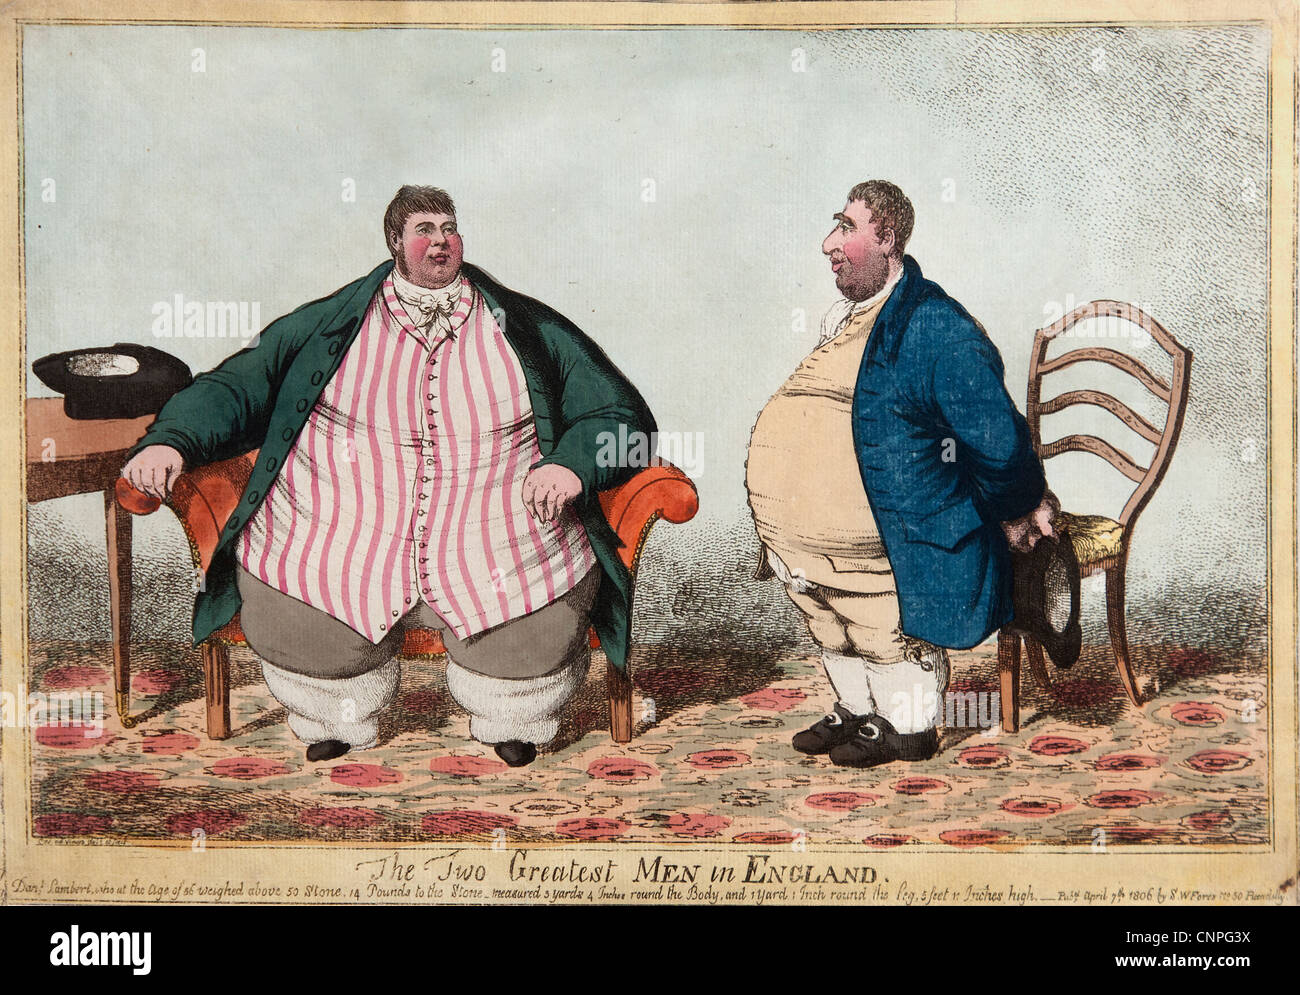 Daniel Lambert 1770-1808 ( weight 52 stones 11 pounds )  British ( The two greatest men in England ) Stock Photo